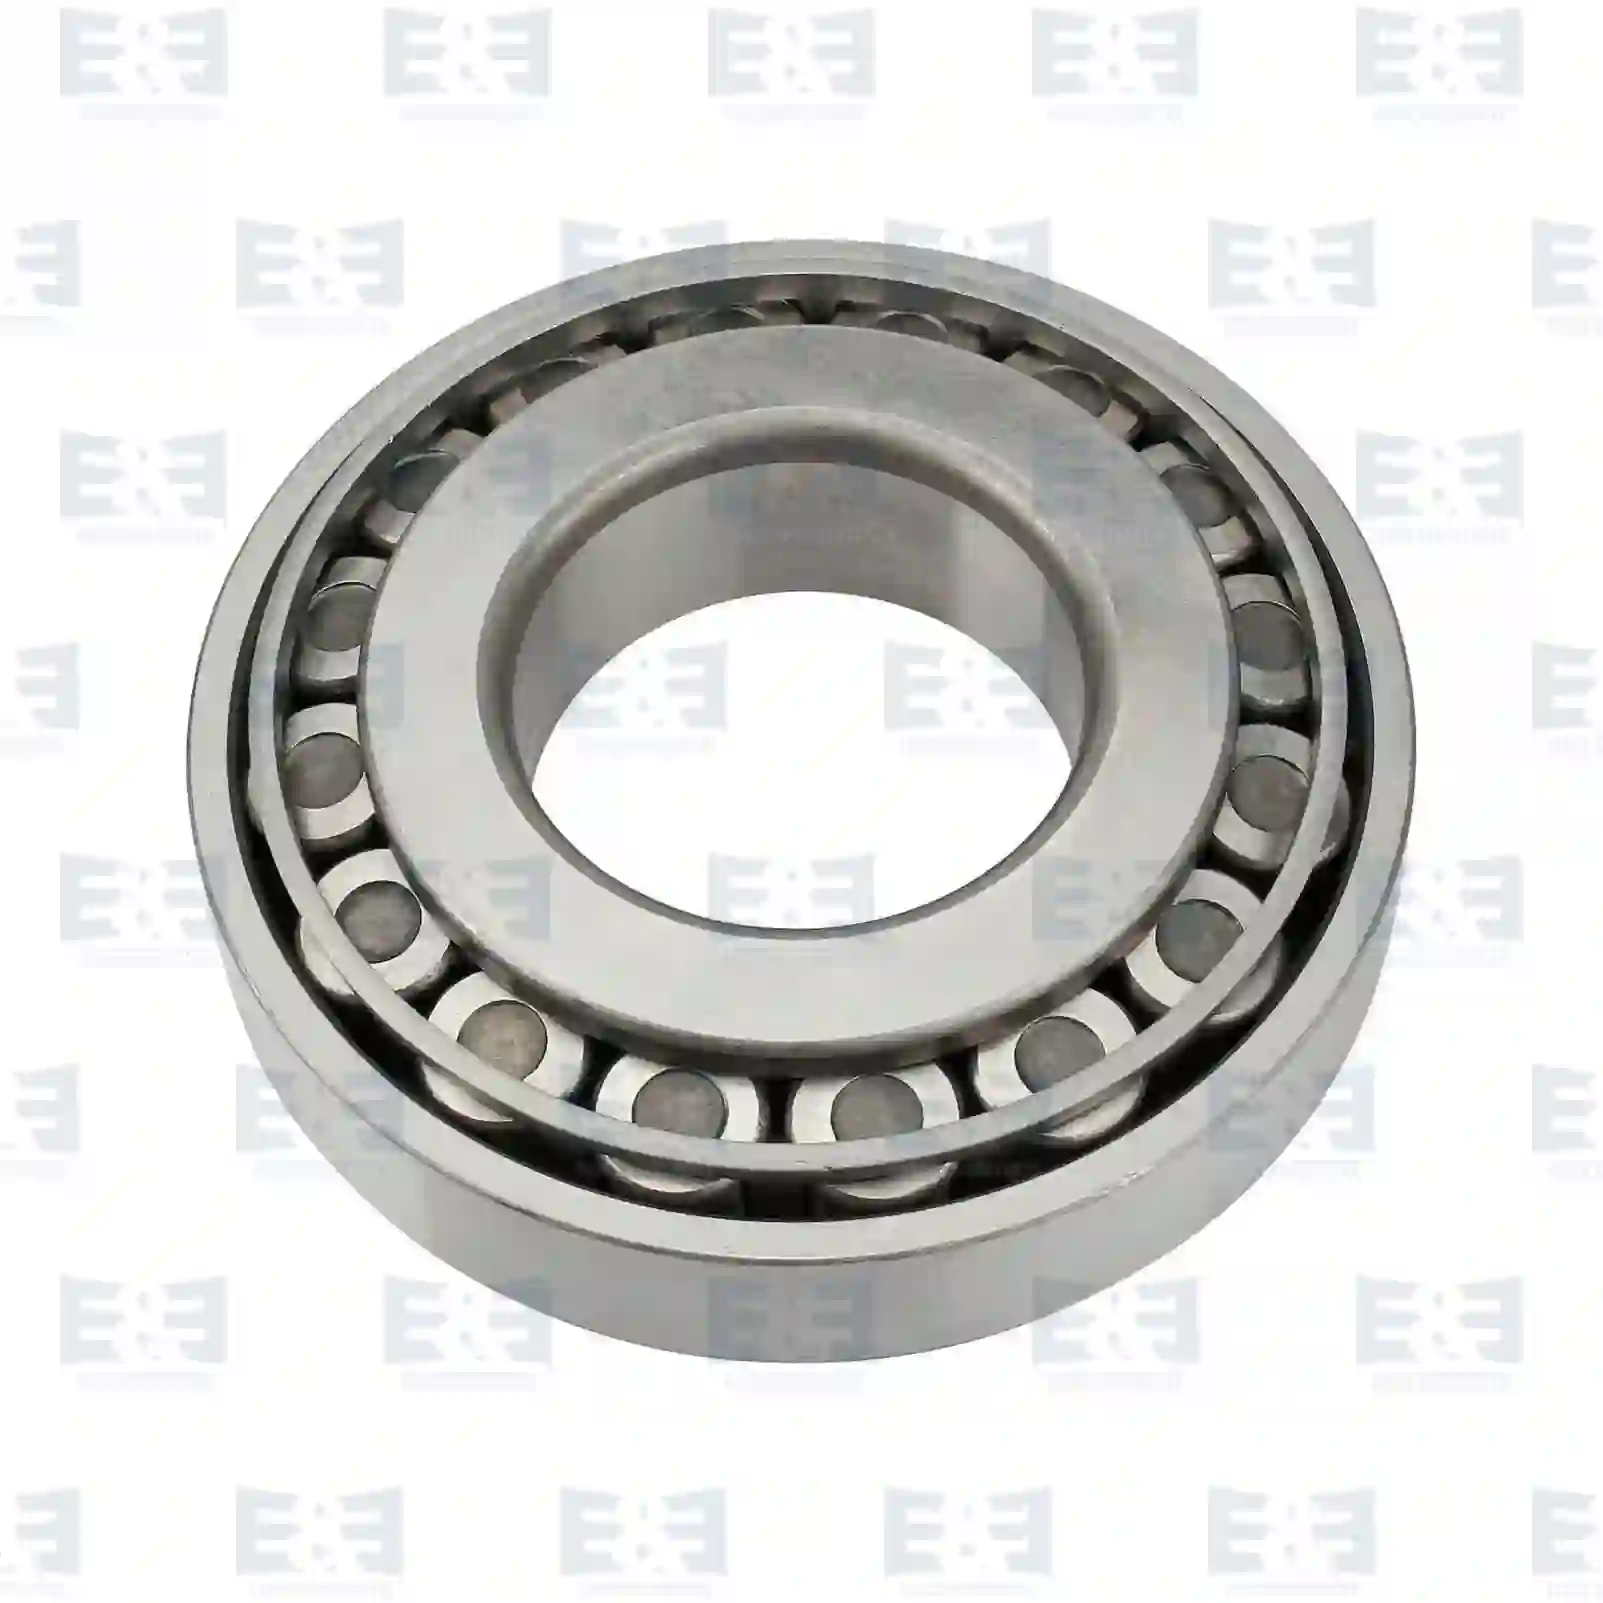 Tapered roller bearing, 2E2285916, 0264026000, 01102859, 94031454, 1-09812013-0, 1-09812023-0, 1-09812070-0, 01102859, 01109985, 06324890113, 0009810505, 0009818905, 0019819705, 0019899705, 0029810205, 0029816005, 0039816205, 0069816505, 0089818805, 0109810005, 0109812805, 0109812905, 0109815505, 0129818805, 0129819205, 0129819405, 0139818405, 0169811205, 3449817005, MH043008, 38326-90002, 40208-90009, 4200001500, 1357711, 366305, ZG02968-0008 ||  2E2285916 E&E Truck Spare Parts | Truck Spare Parts, Auotomotive Spare Parts Tapered roller bearing, 2E2285916, 0264026000, 01102859, 94031454, 1-09812013-0, 1-09812023-0, 1-09812070-0, 01102859, 01109985, 06324890113, 0009810505, 0009818905, 0019819705, 0019899705, 0029810205, 0029816005, 0039816205, 0069816505, 0089818805, 0109810005, 0109812805, 0109812905, 0109815505, 0129818805, 0129819205, 0129819405, 0139818405, 0169811205, 3449817005, MH043008, 38326-90002, 40208-90009, 4200001500, 1357711, 366305, ZG02968-0008 ||  2E2285916 E&E Truck Spare Parts | Truck Spare Parts, Auotomotive Spare Parts